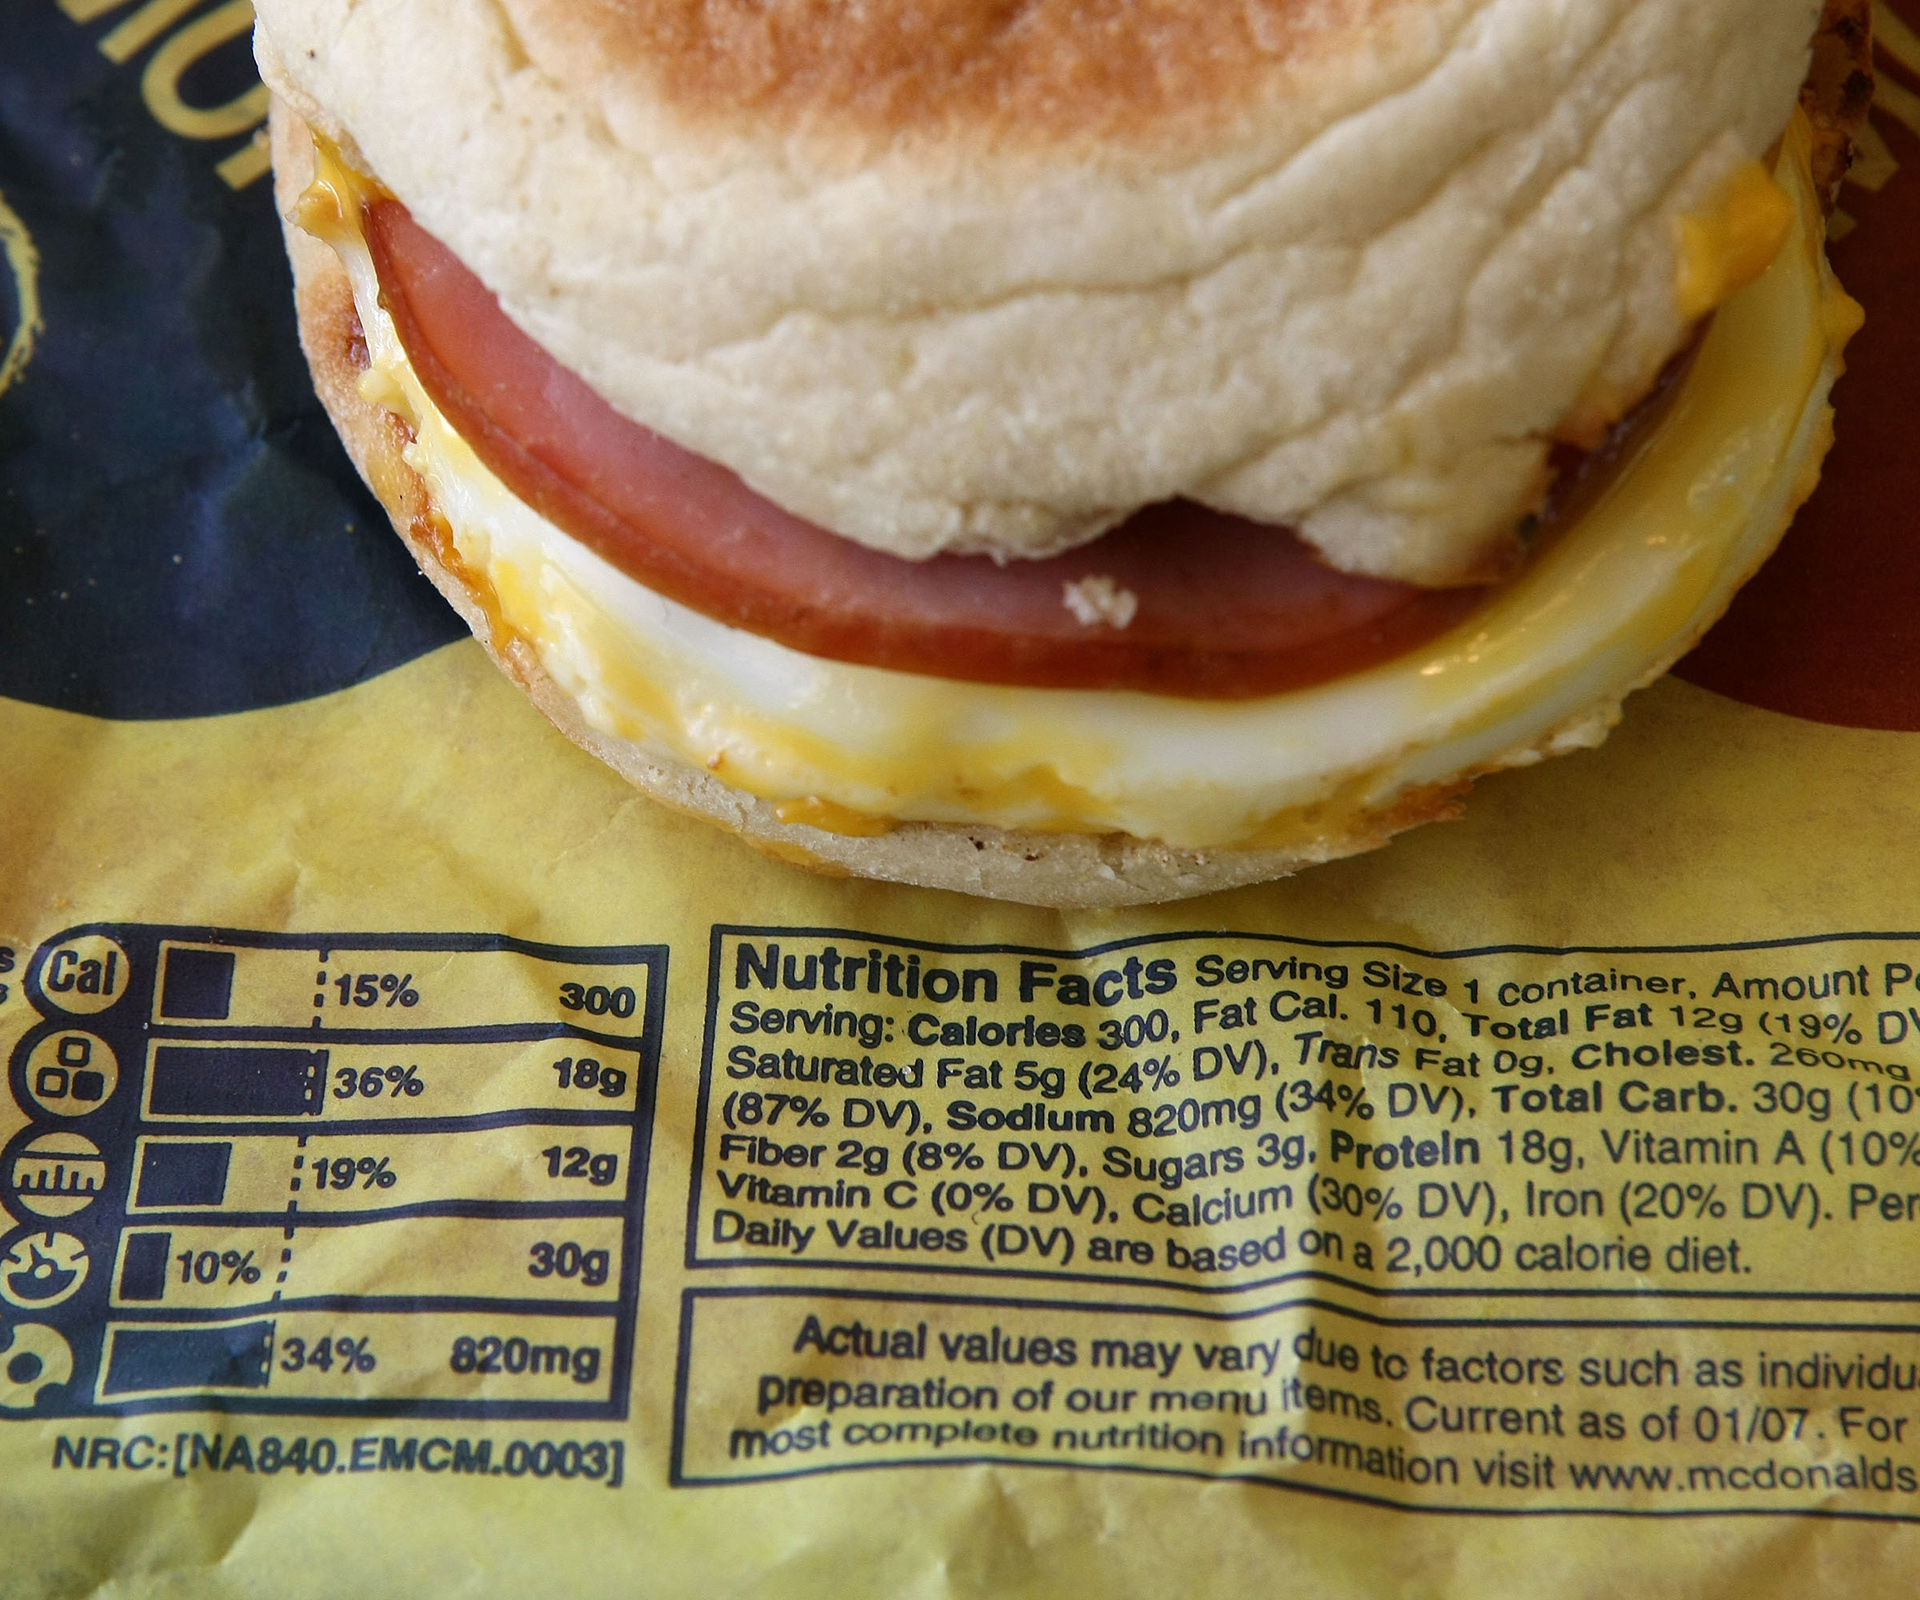 Man claims he found a roach in his Macca’s McMuffin on his THIRD BITE